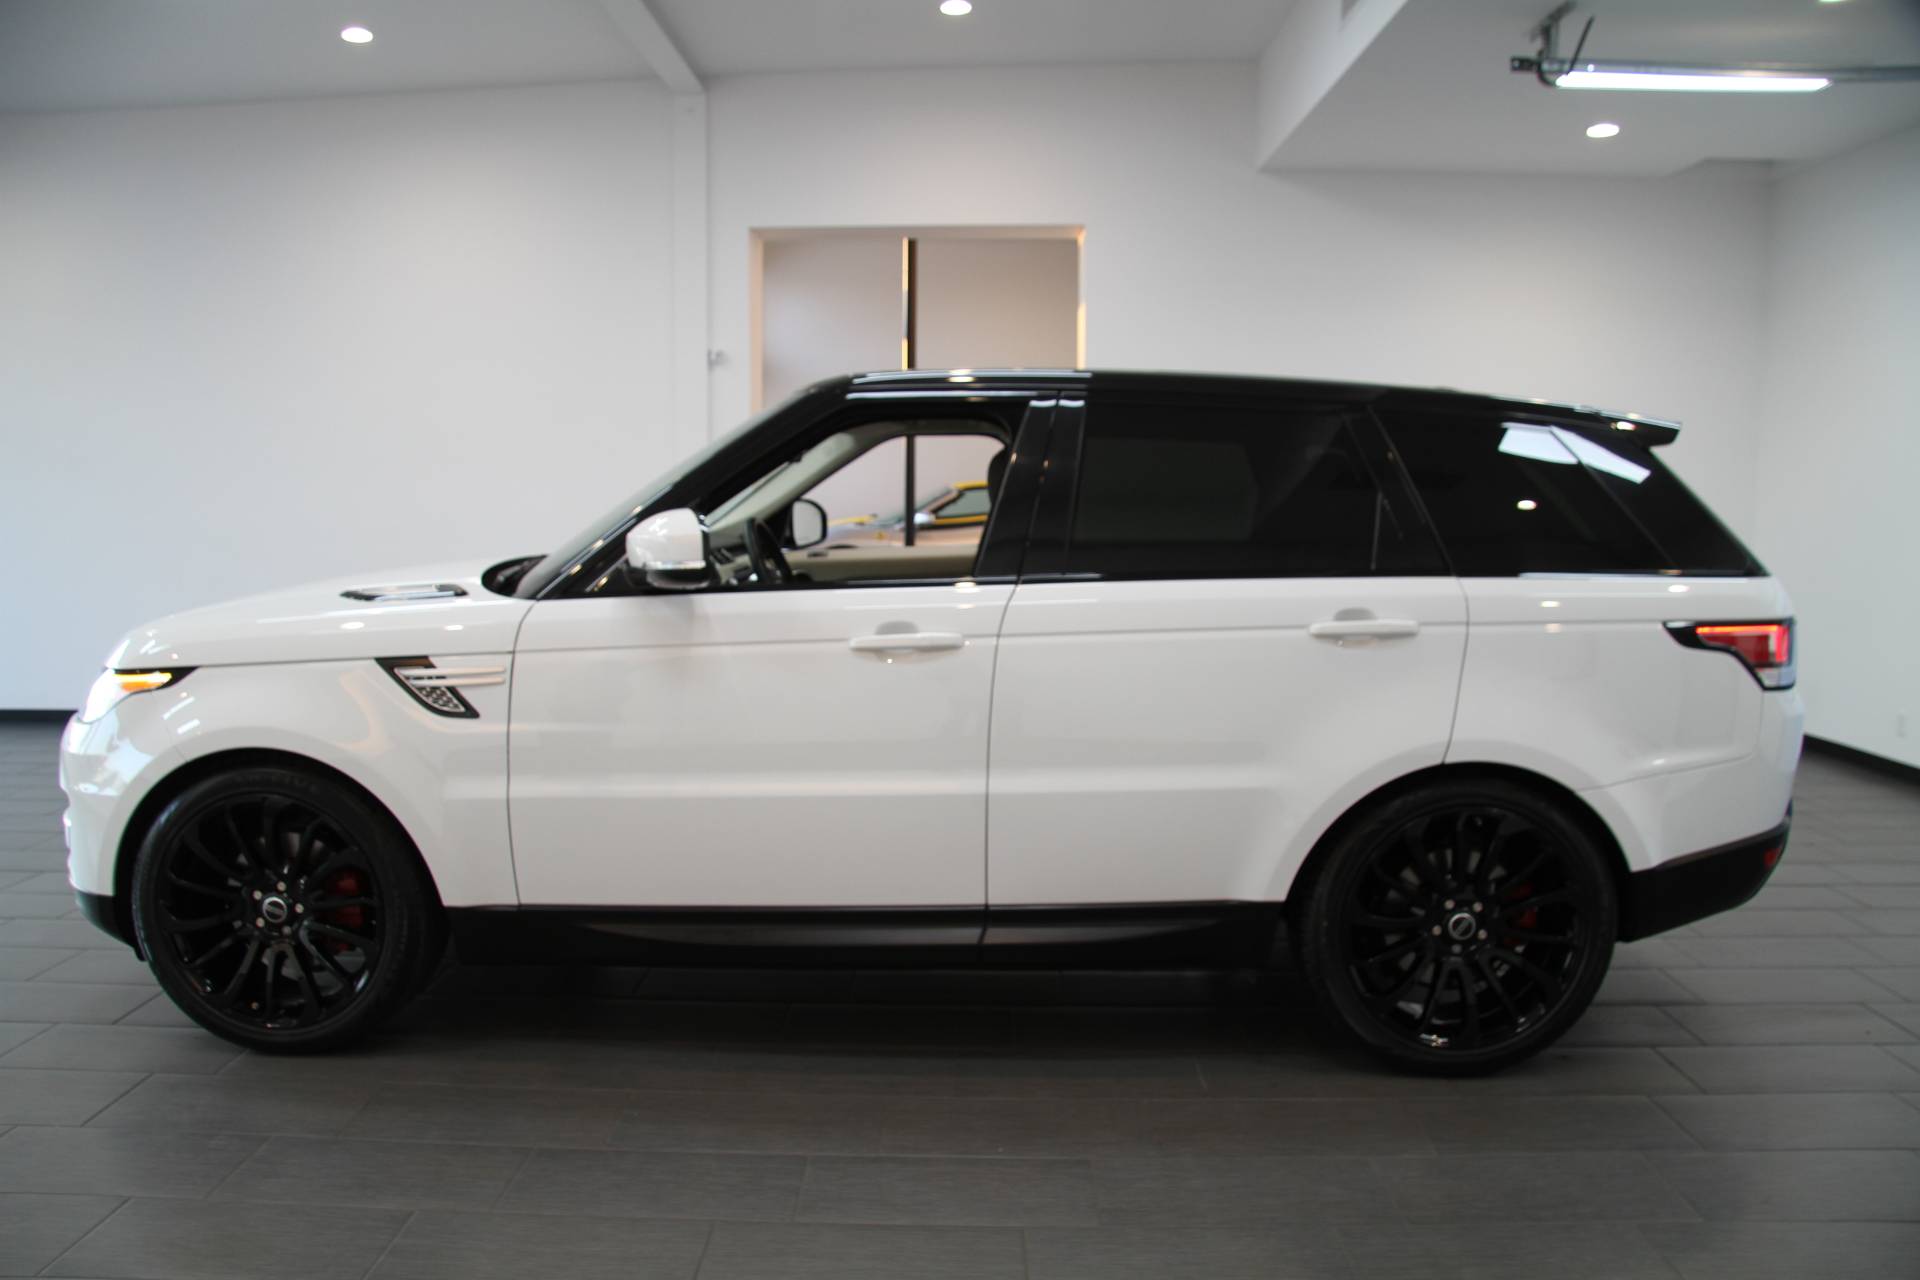 2015 Land Rover Range Rover Sport HSE Stock # 6103 for sale near